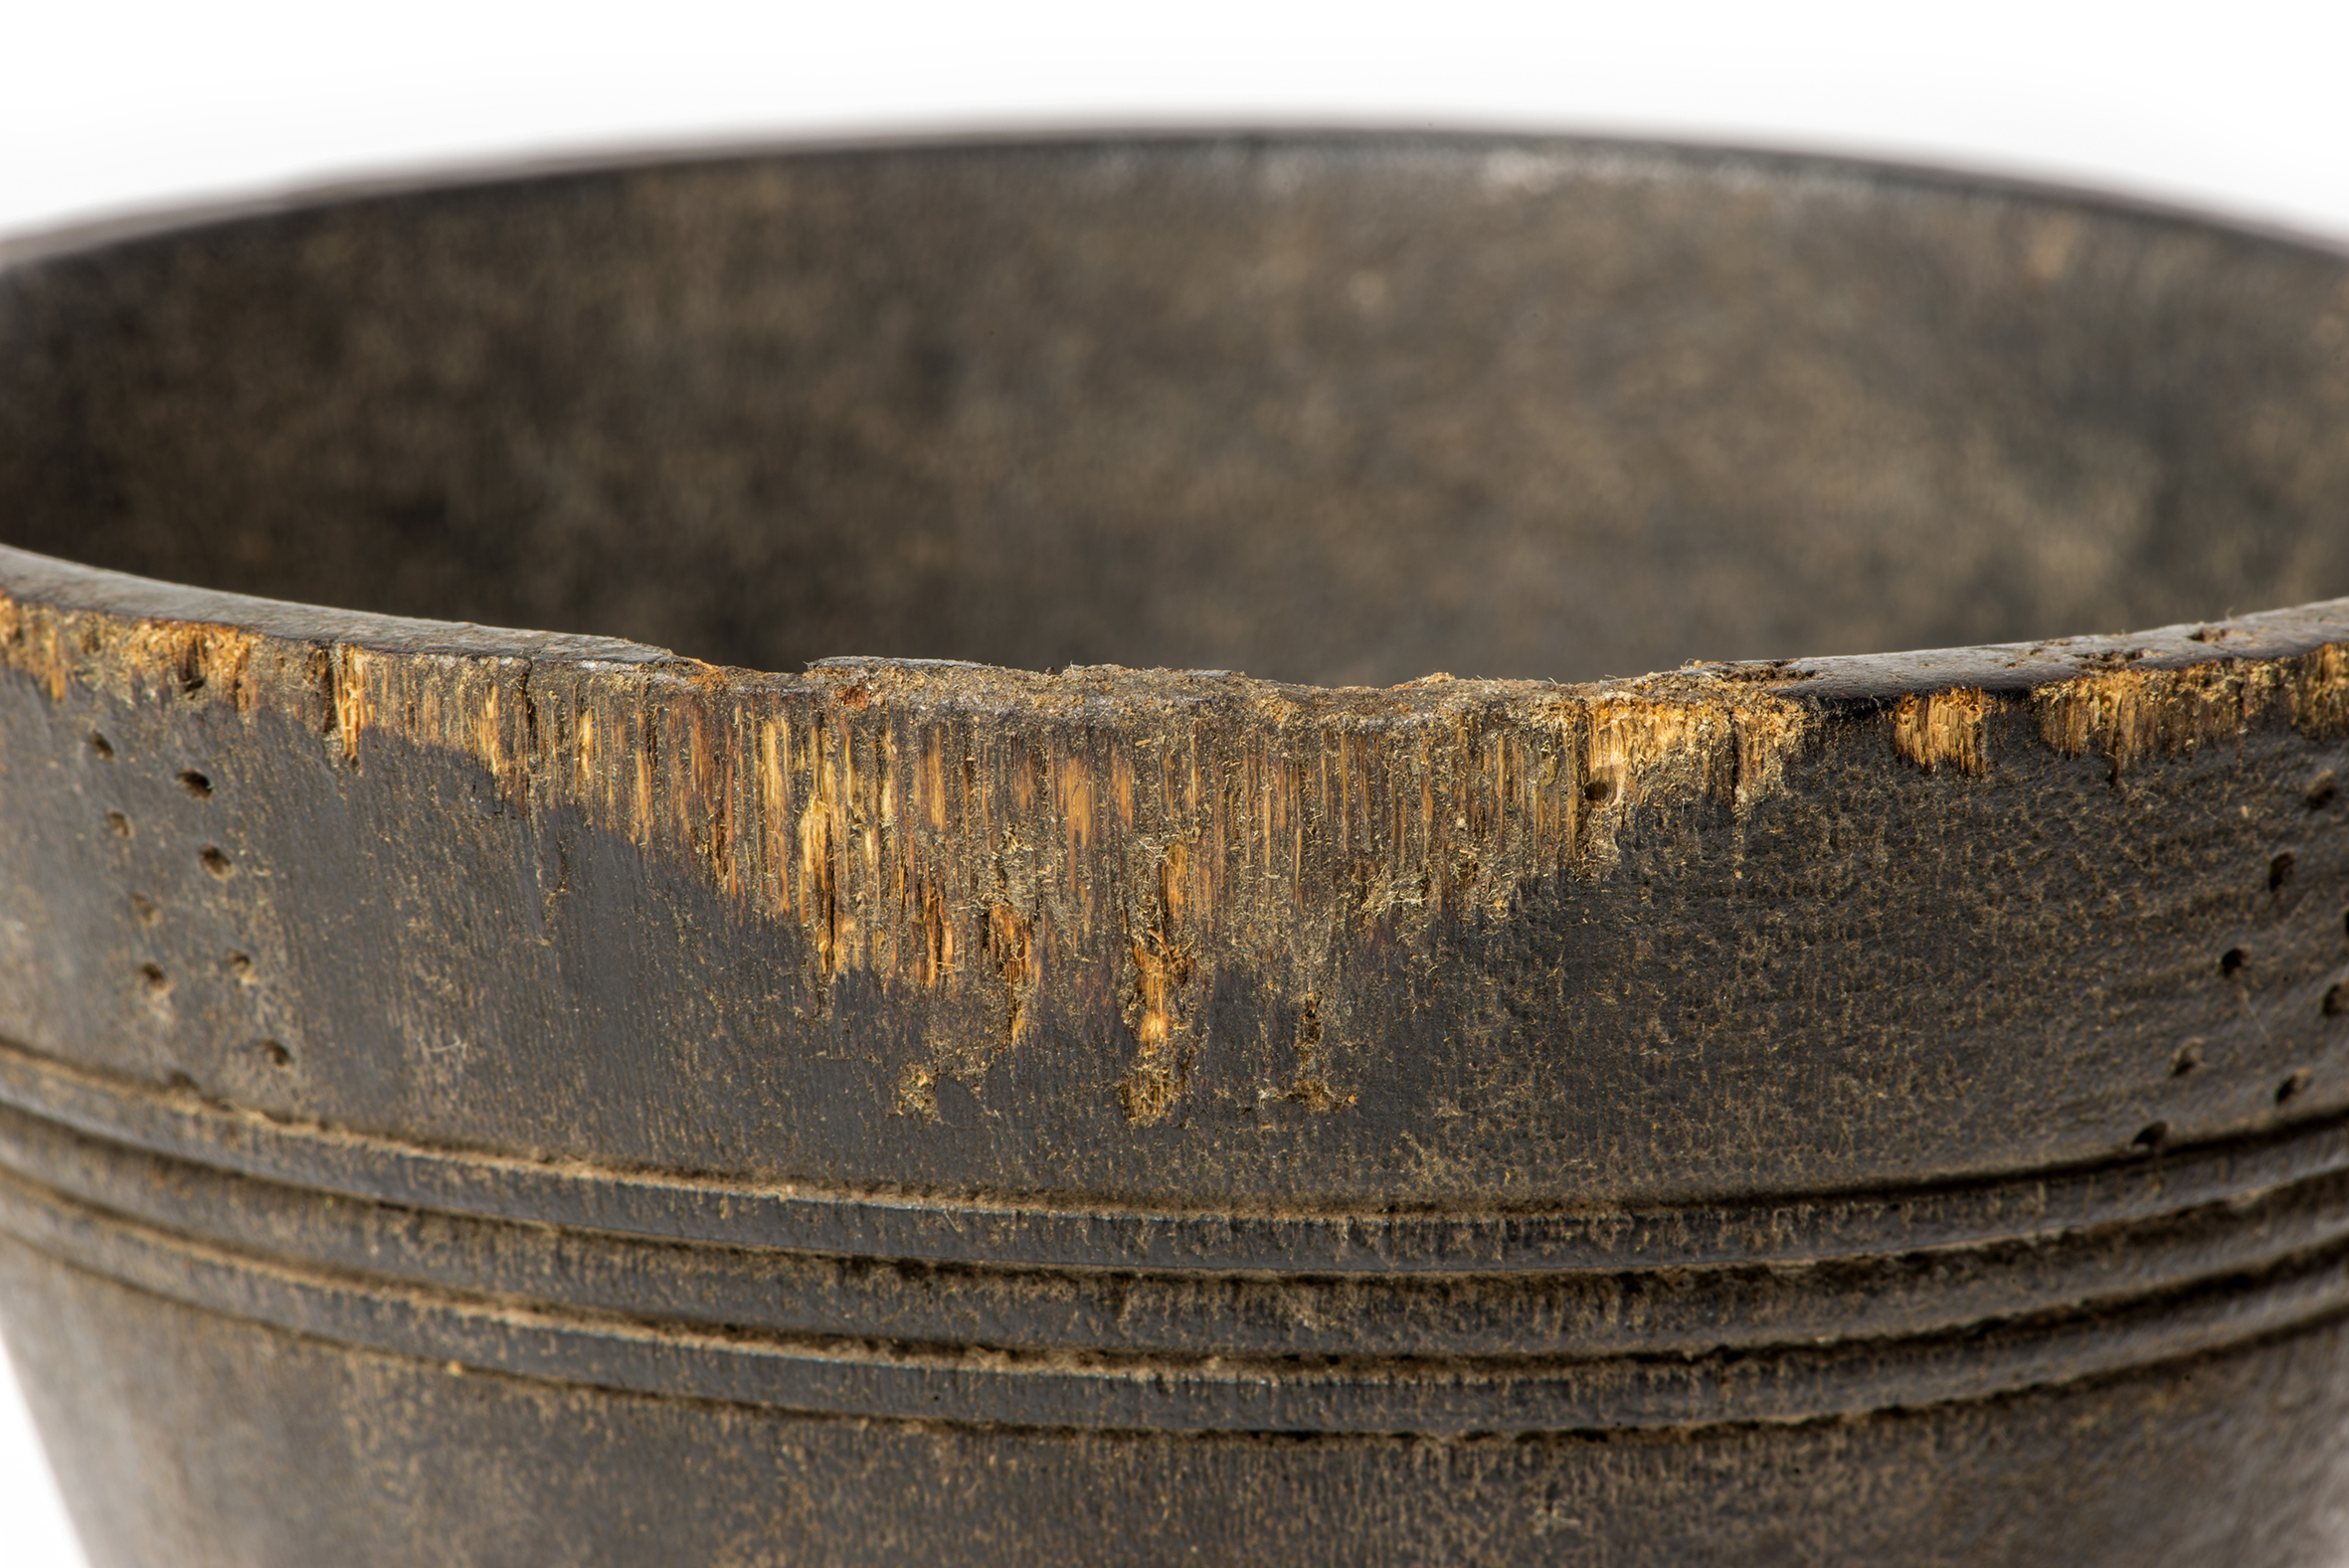 Figure 2: Abrasion damages on the external upper part of the cup showing the fibrous texture of the material. Photo E. Disner.